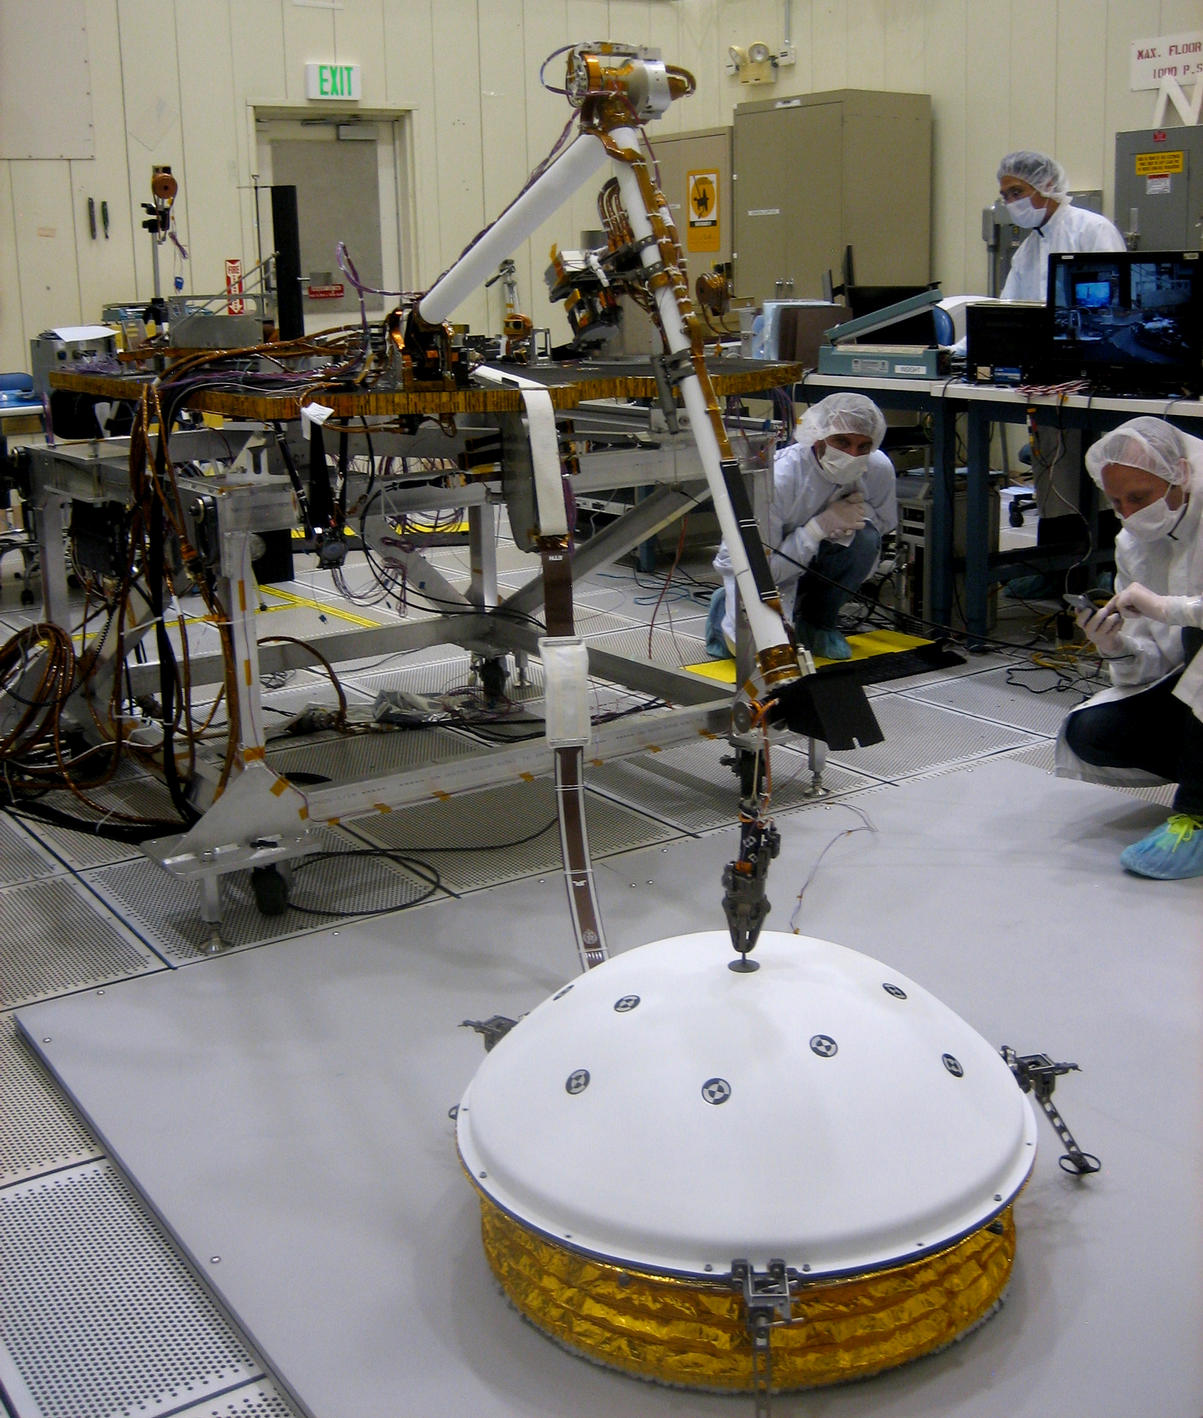 This image shows testing of InSight's robotic arm at JPL about two years before it will perform these tasks on Mars.